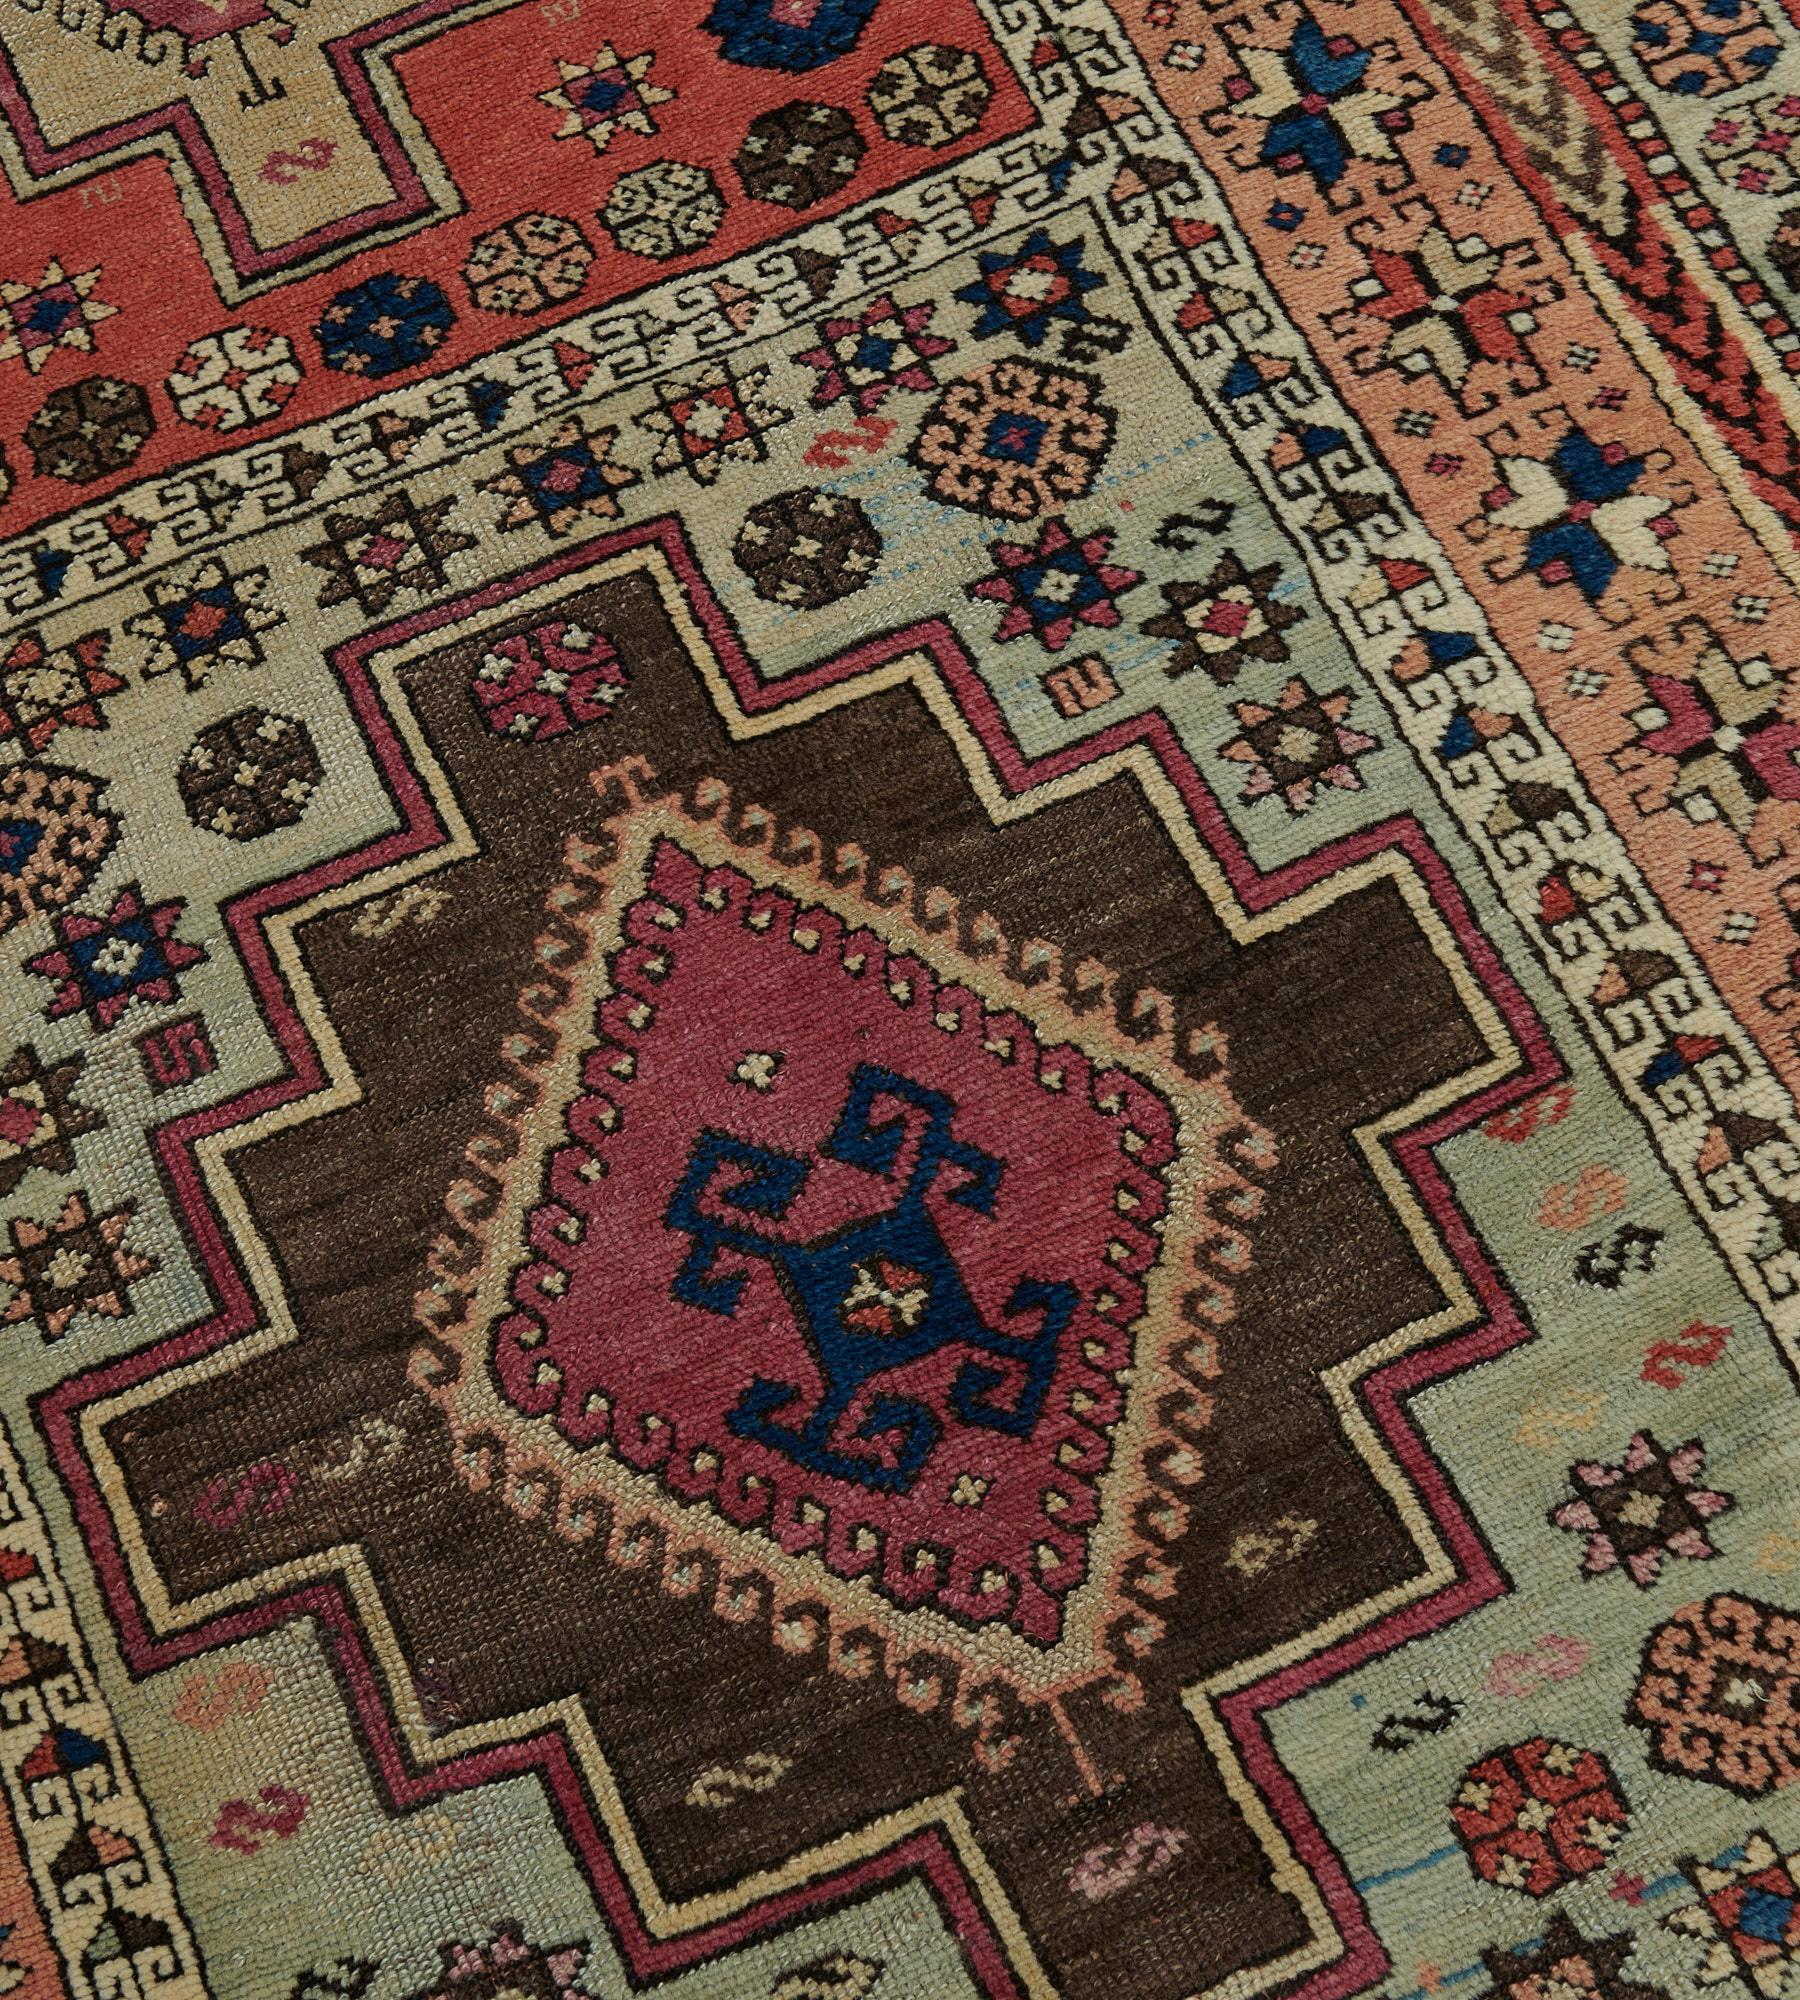 Antique Hand-Knotted Wool Traditional Karabagh Runner, c. 1880 For Sale 6